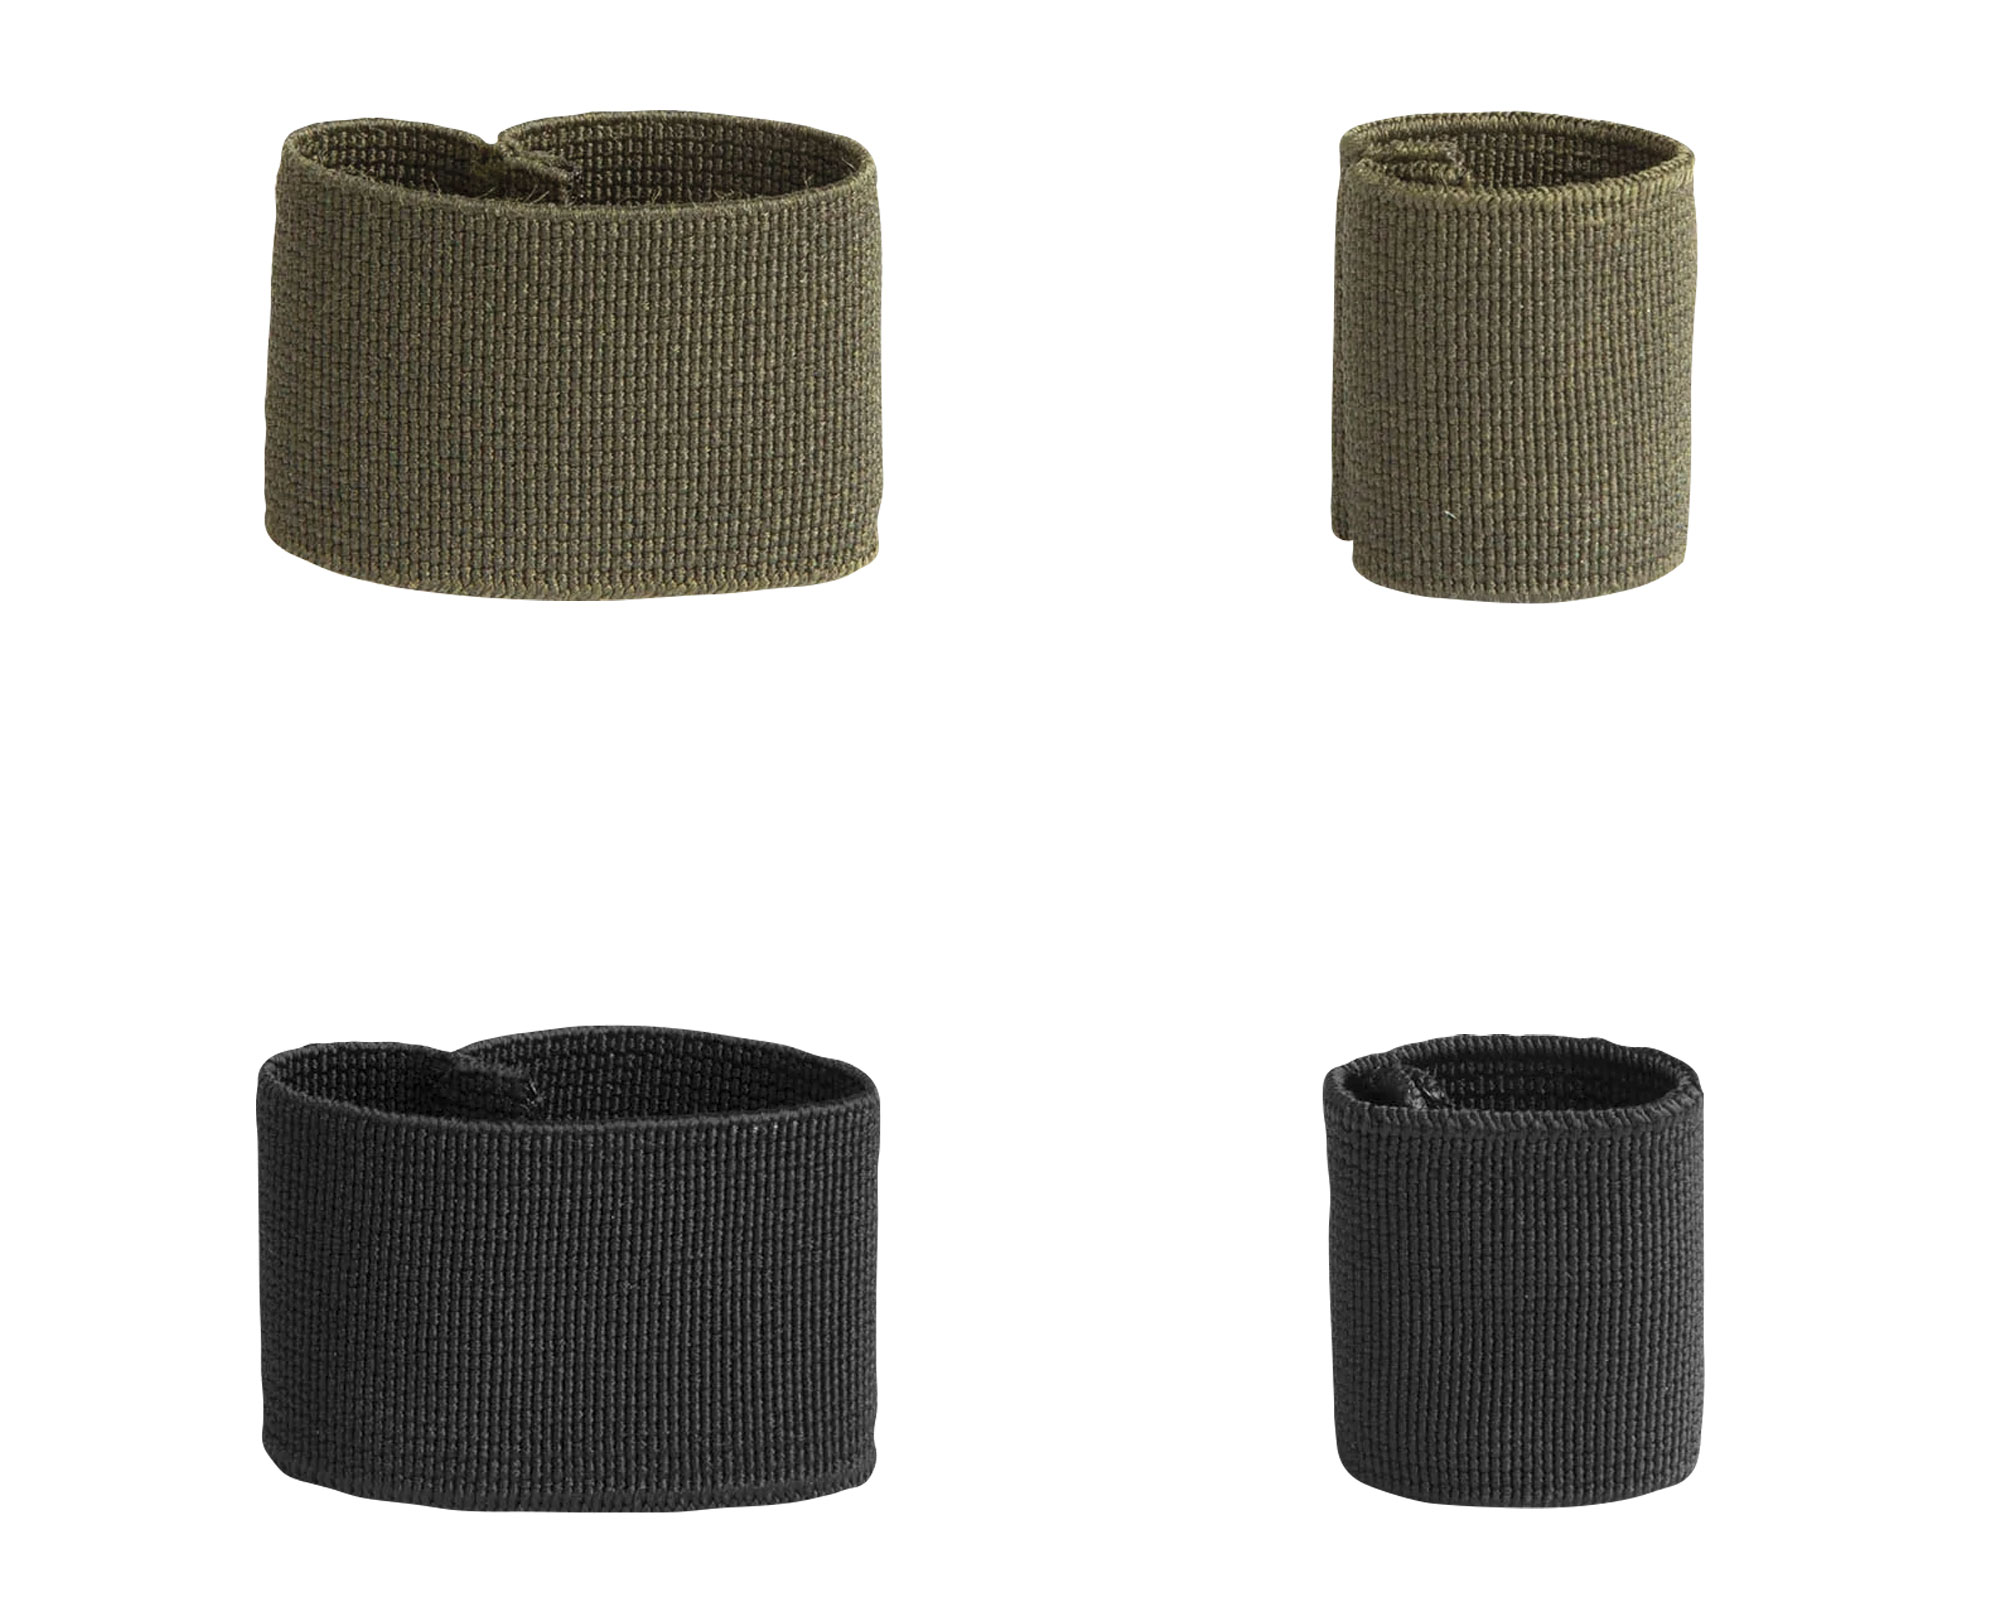 Savotta Elastic Strap Keepers packing strap holders in 25 mm and 50 mm.